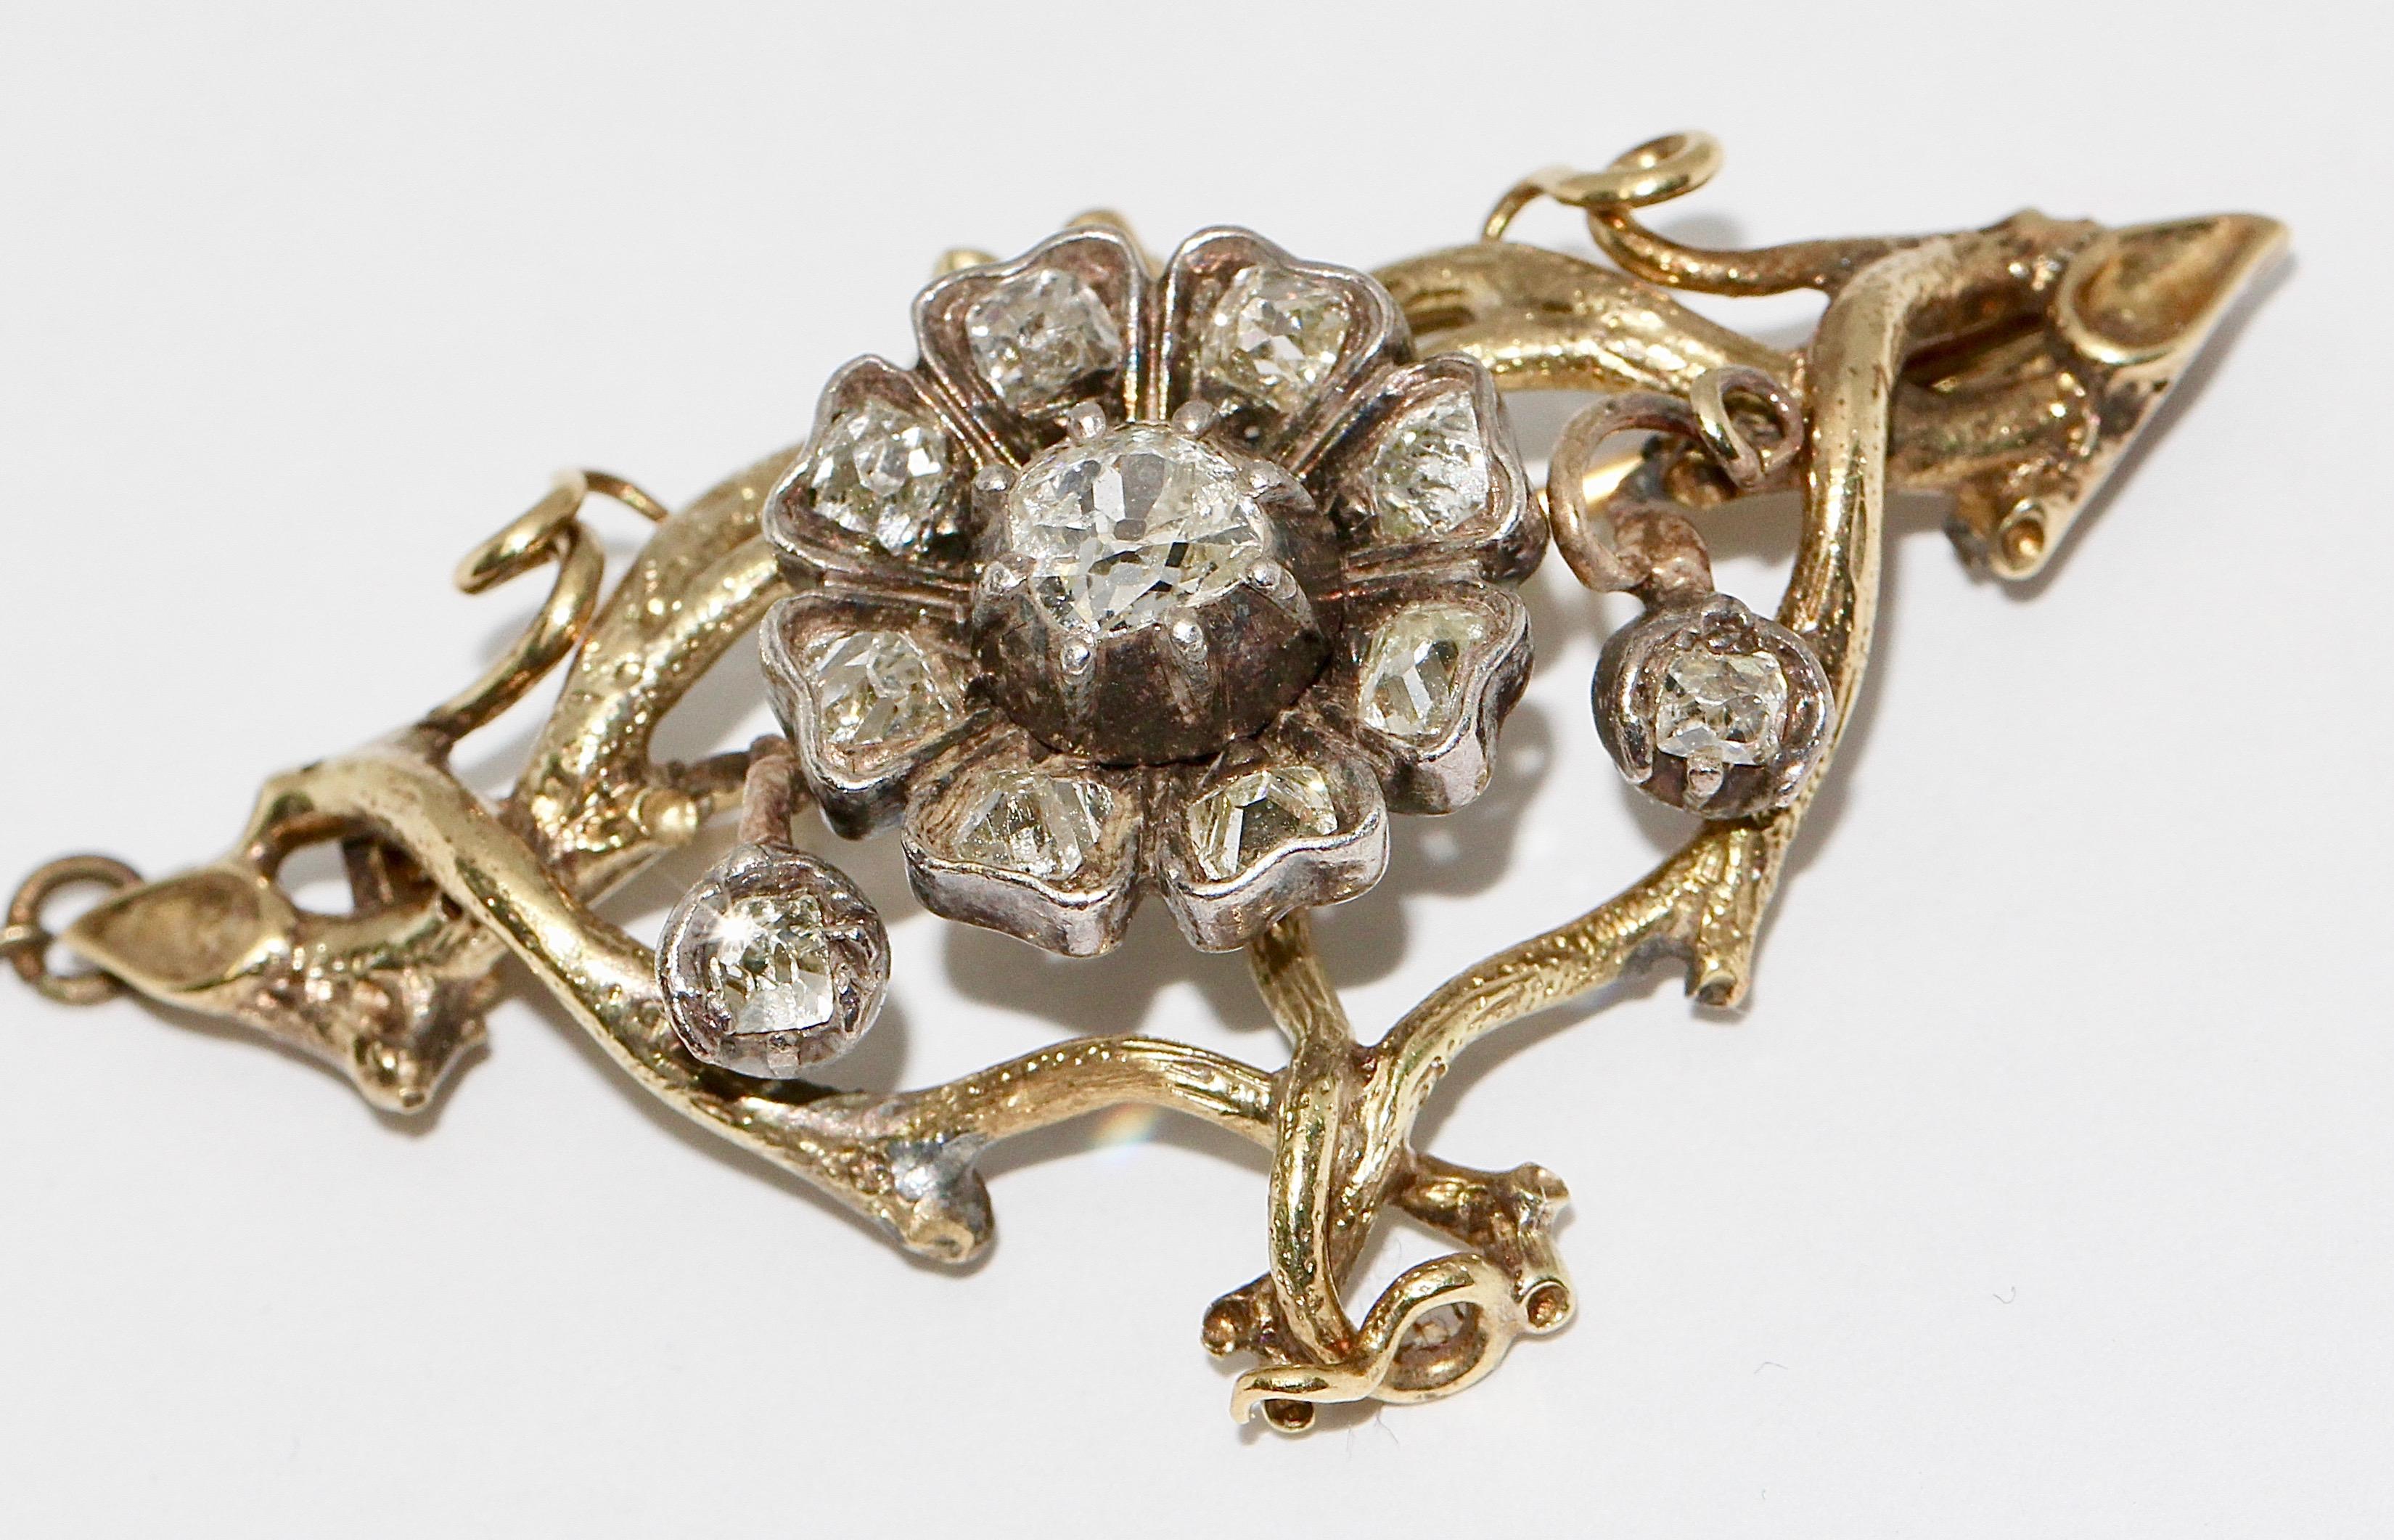 Antique, Baroque Gold Diamond Brooch.

The central diamond weighs about 0.45 carat.
The brooch also has a safety pin.